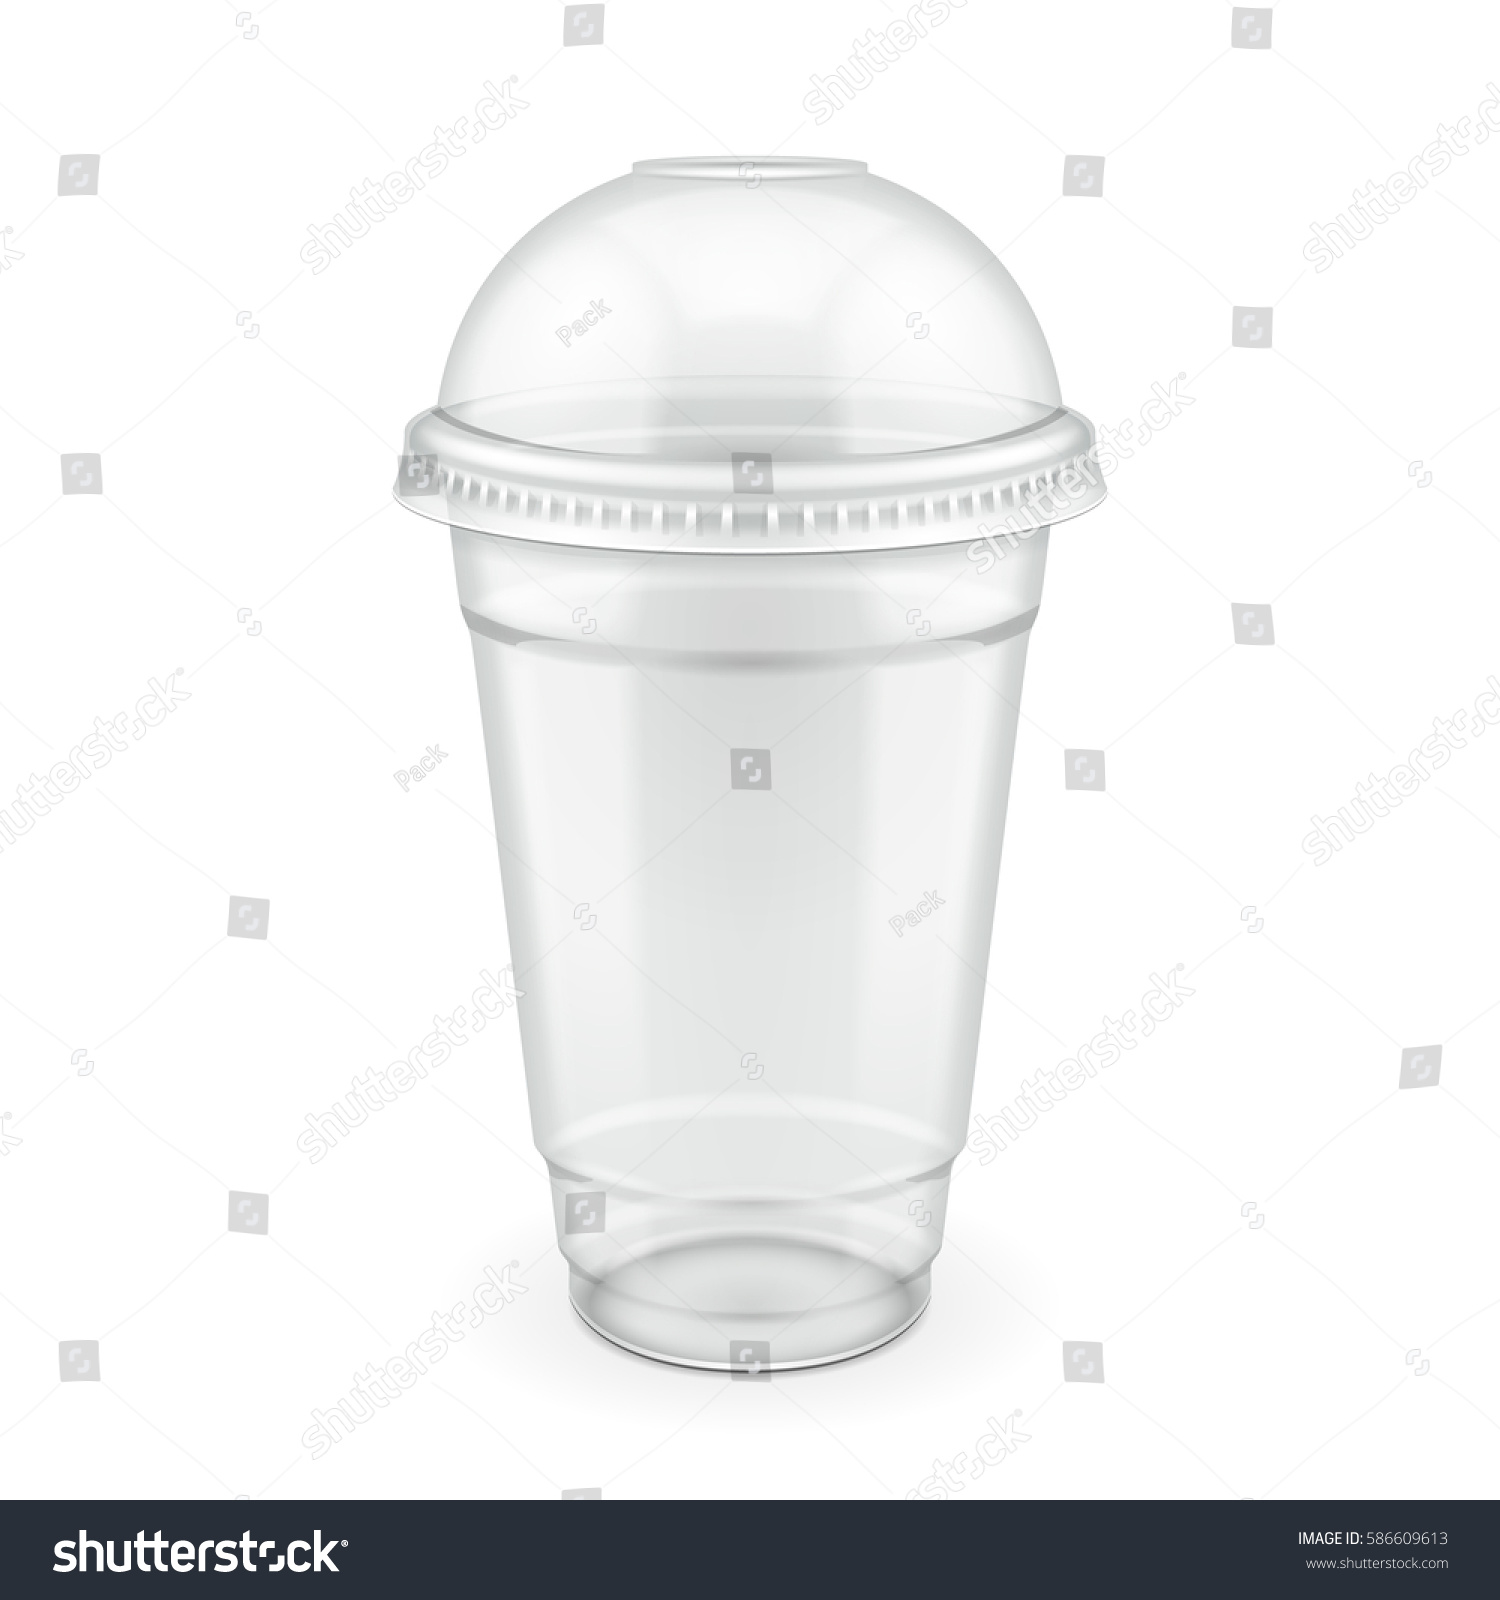 SVG of Mockup Empty Disposable Plastic Milkshake Cup With Lid. Transparent. Container For Cold, Drink. Juice Fresh, Coffee, Tea. Illustration Isolated On White Background Mock Up Template For Your Design. svg